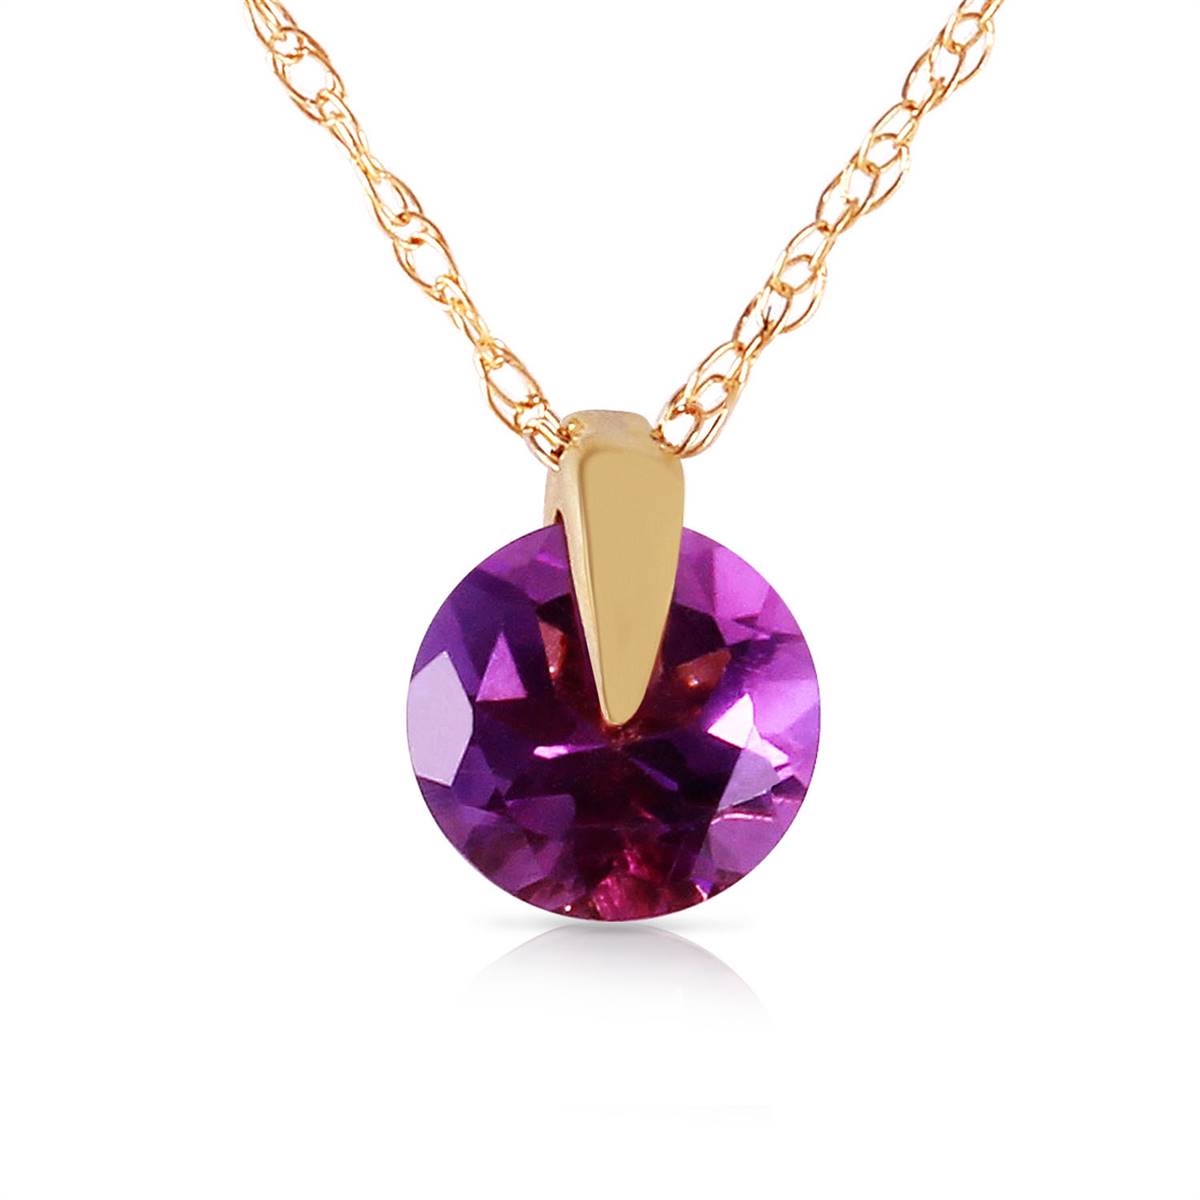 0.75 Carat 14K Solid Yellow Gold Saw It Coming Amethyst Necklace